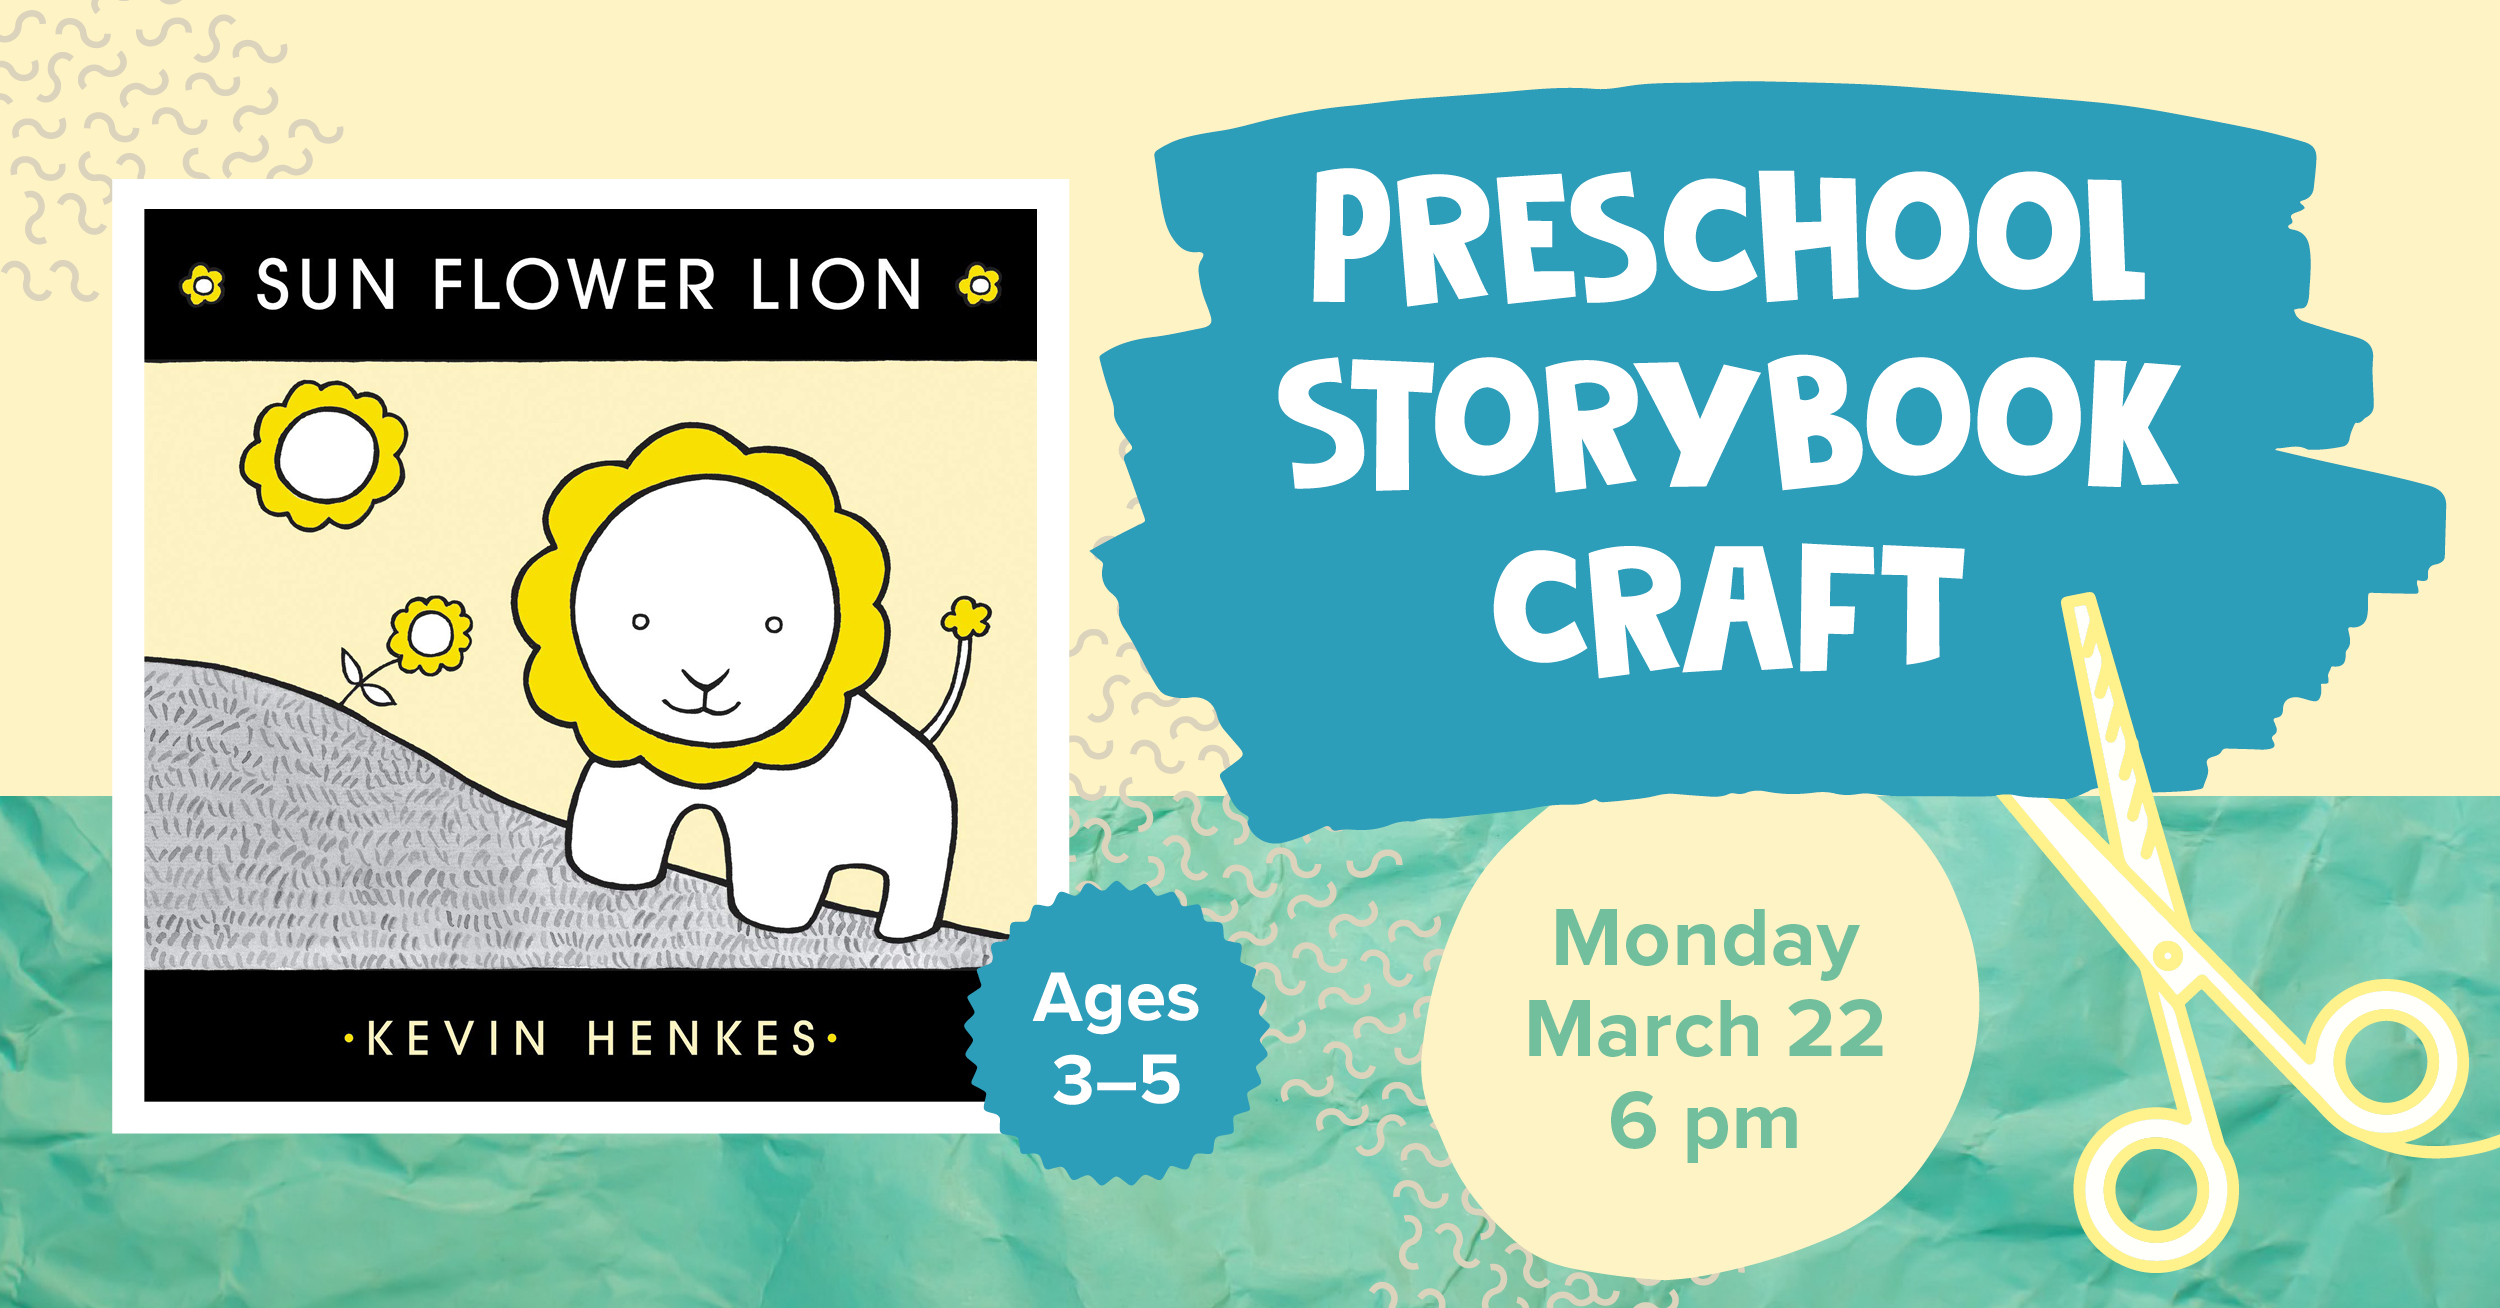 Preschool Storybook Craft. Book title: Sun Flower Lion by Kevin Henkes. Ages 3 to 5. Monday, March 22 at 6pm